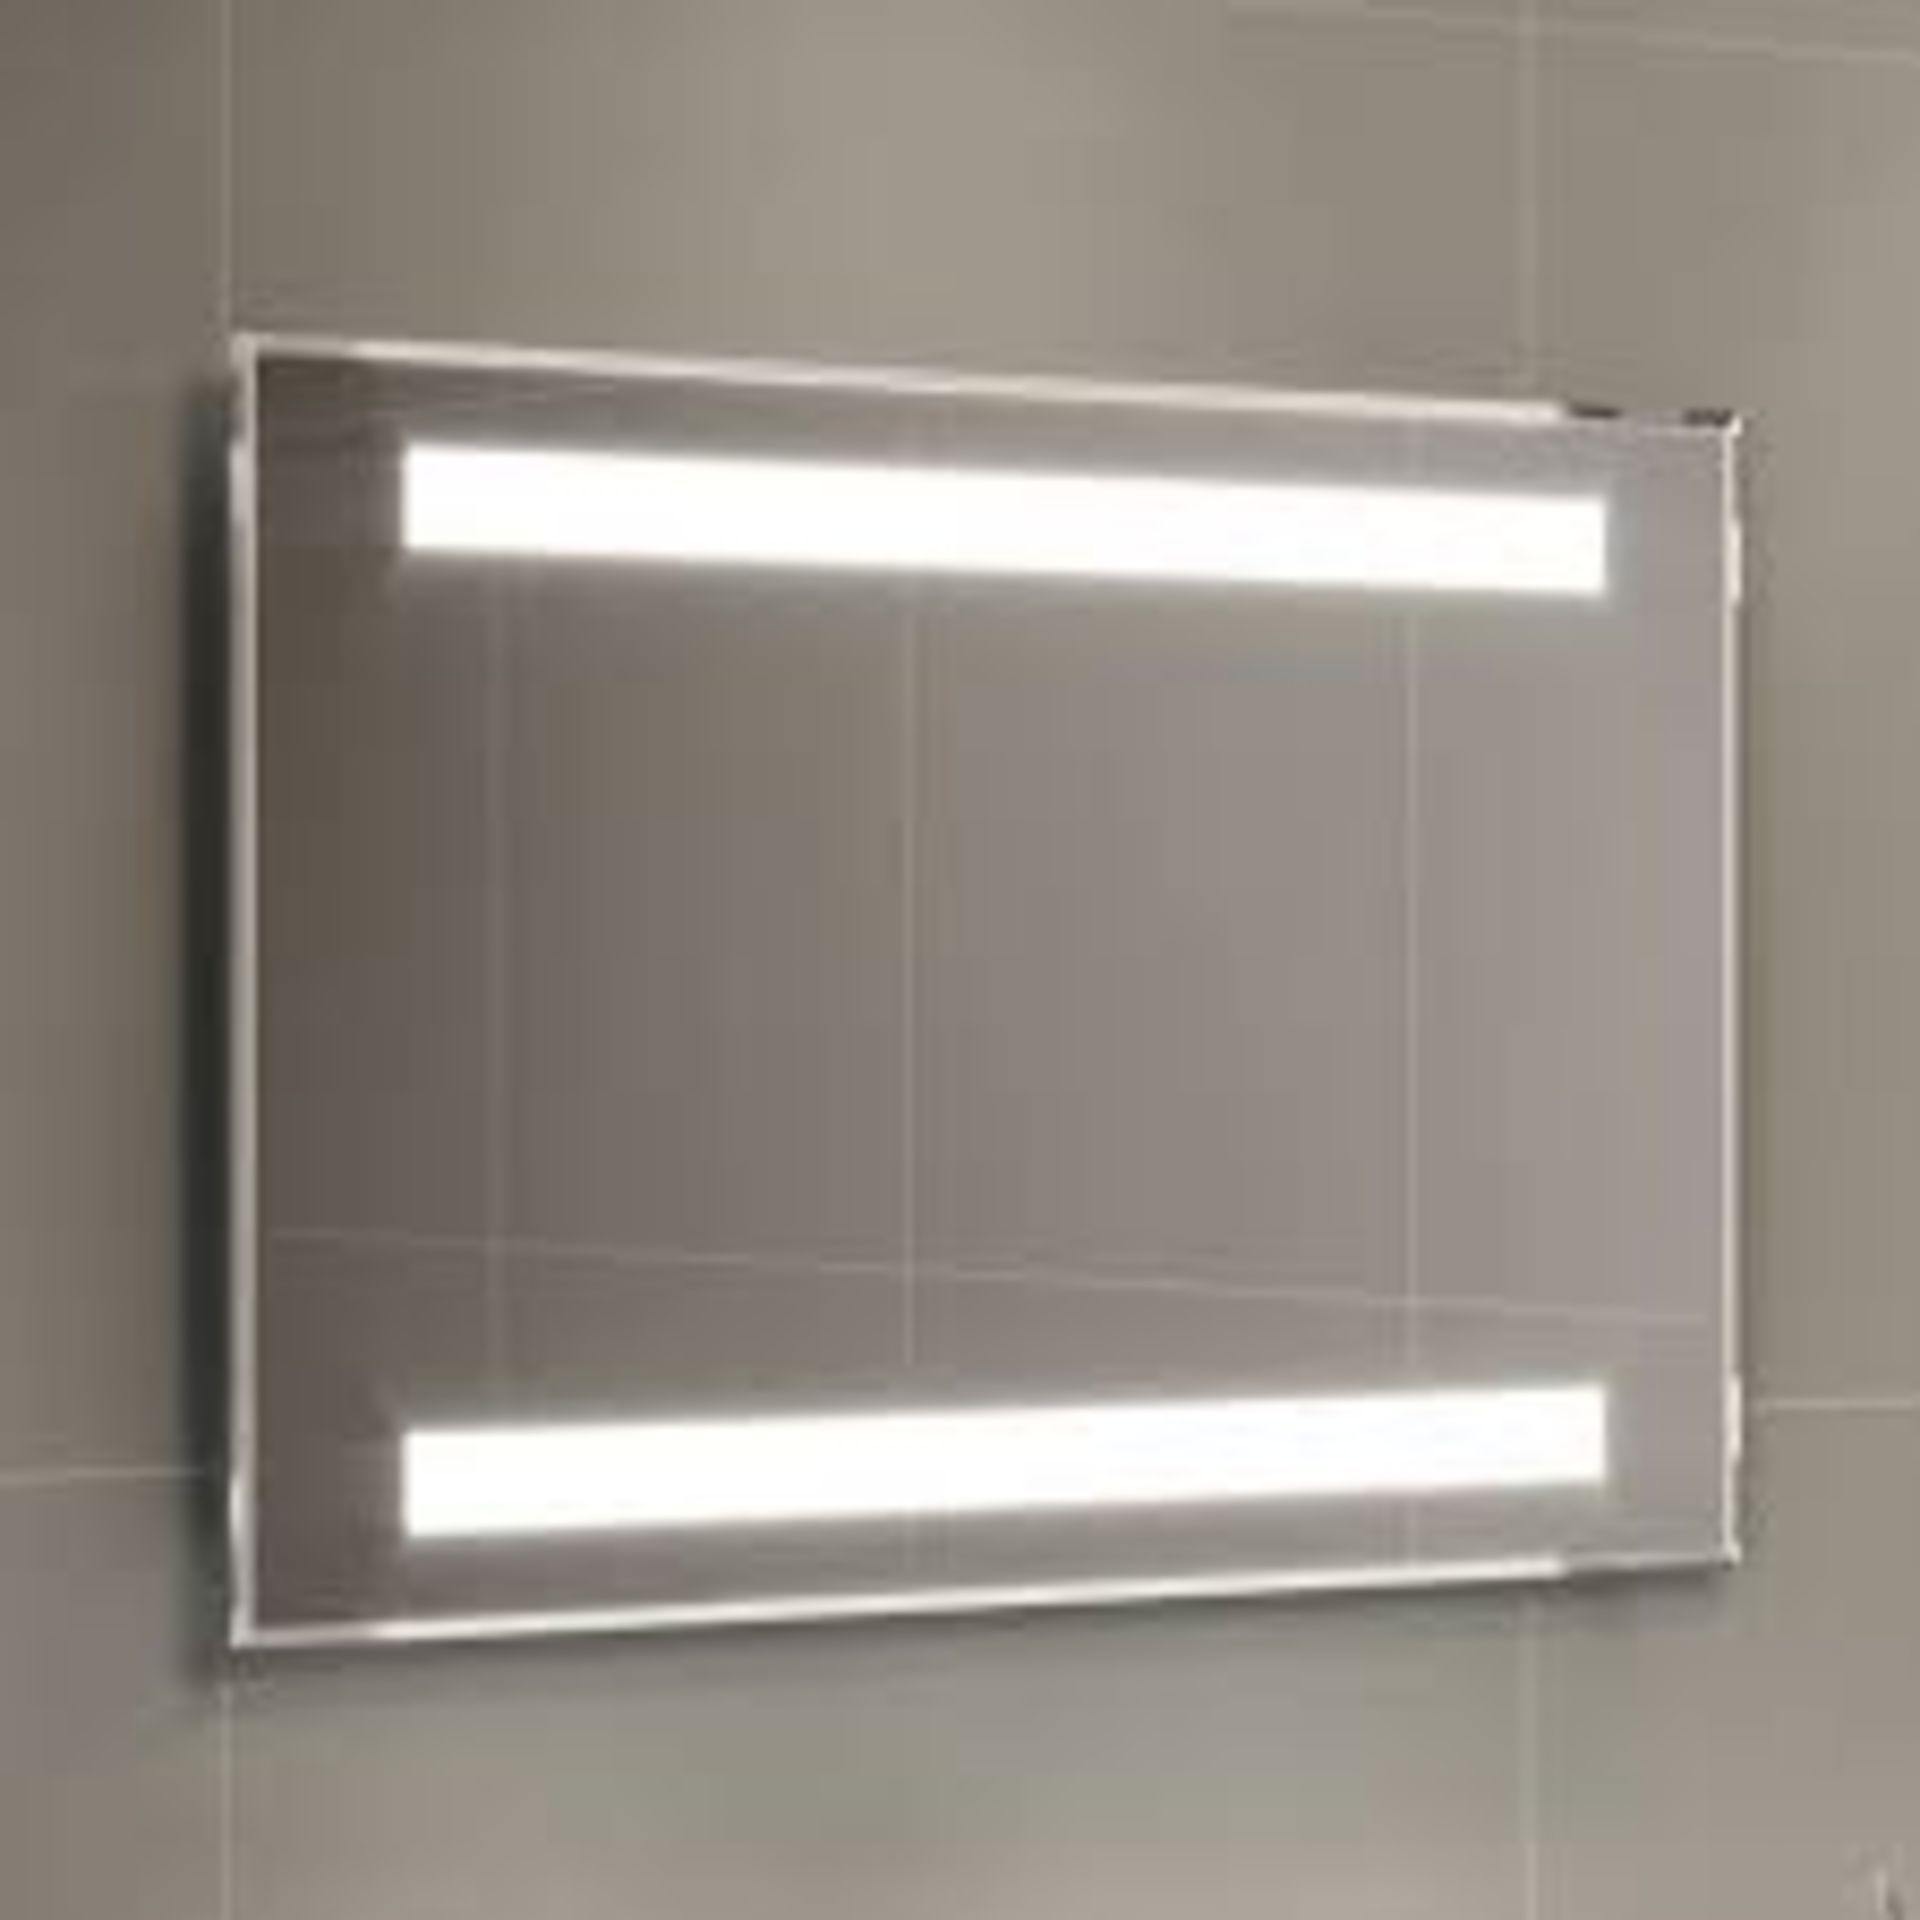 (J120) 500x700mm Omega LED Mirror - Battery Operated. RRP £299.99. Energy saving controlled On / Off - Bild 3 aus 4